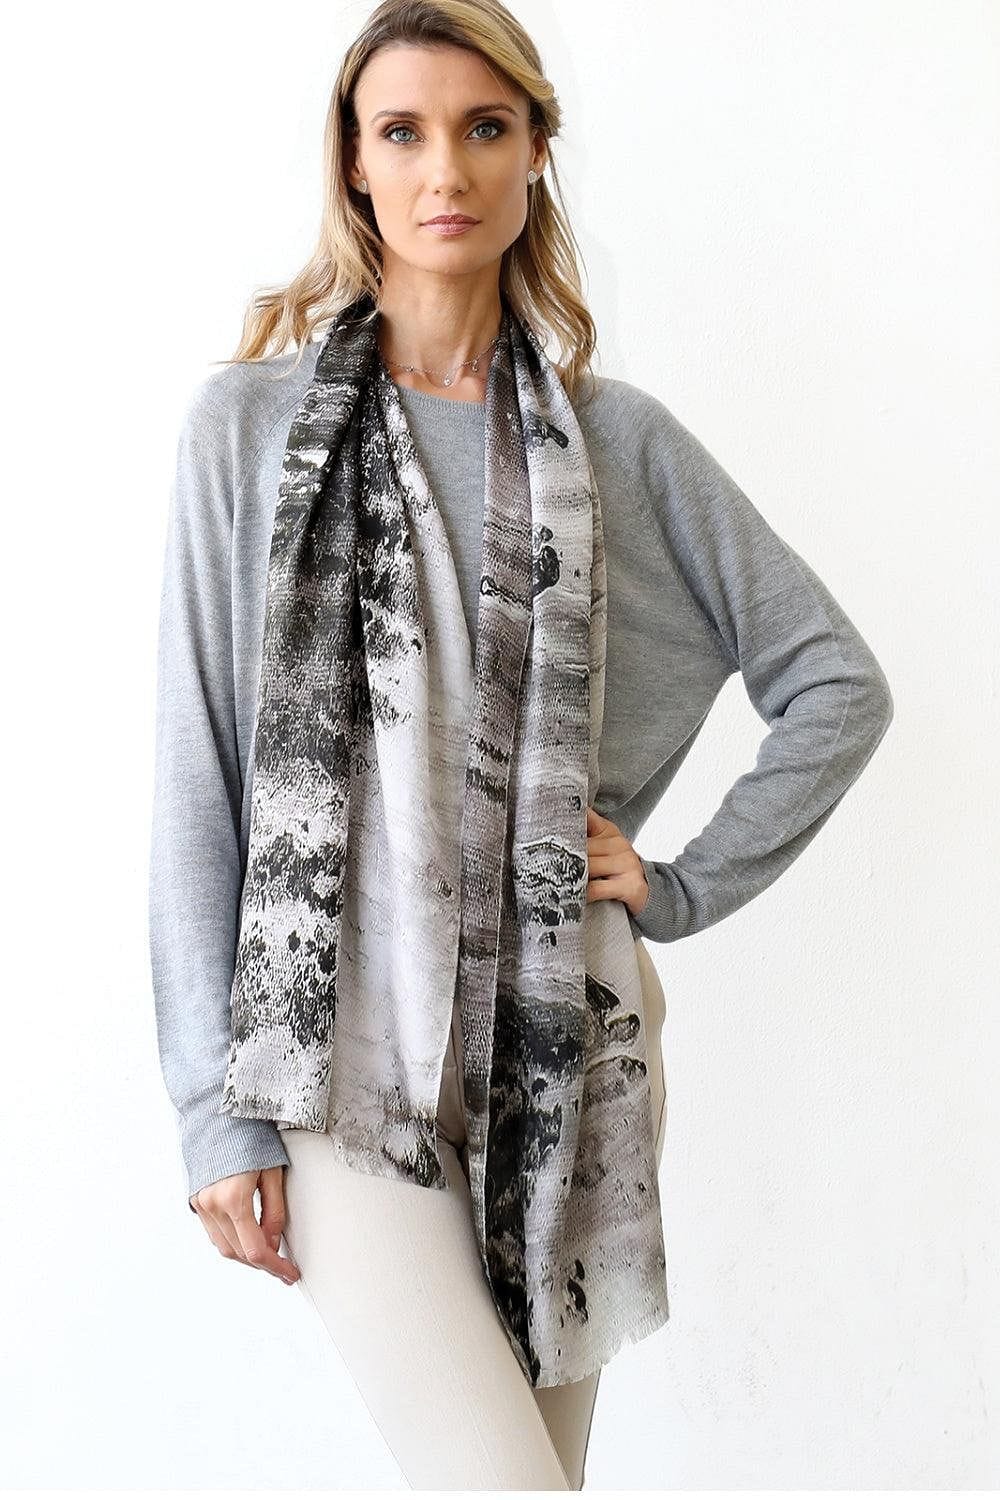 Crushed Pebble Scarf Silk Grey in a long rectangle shape styled over a grey sweater and white pants. Blond haired woman wearing this outfit.